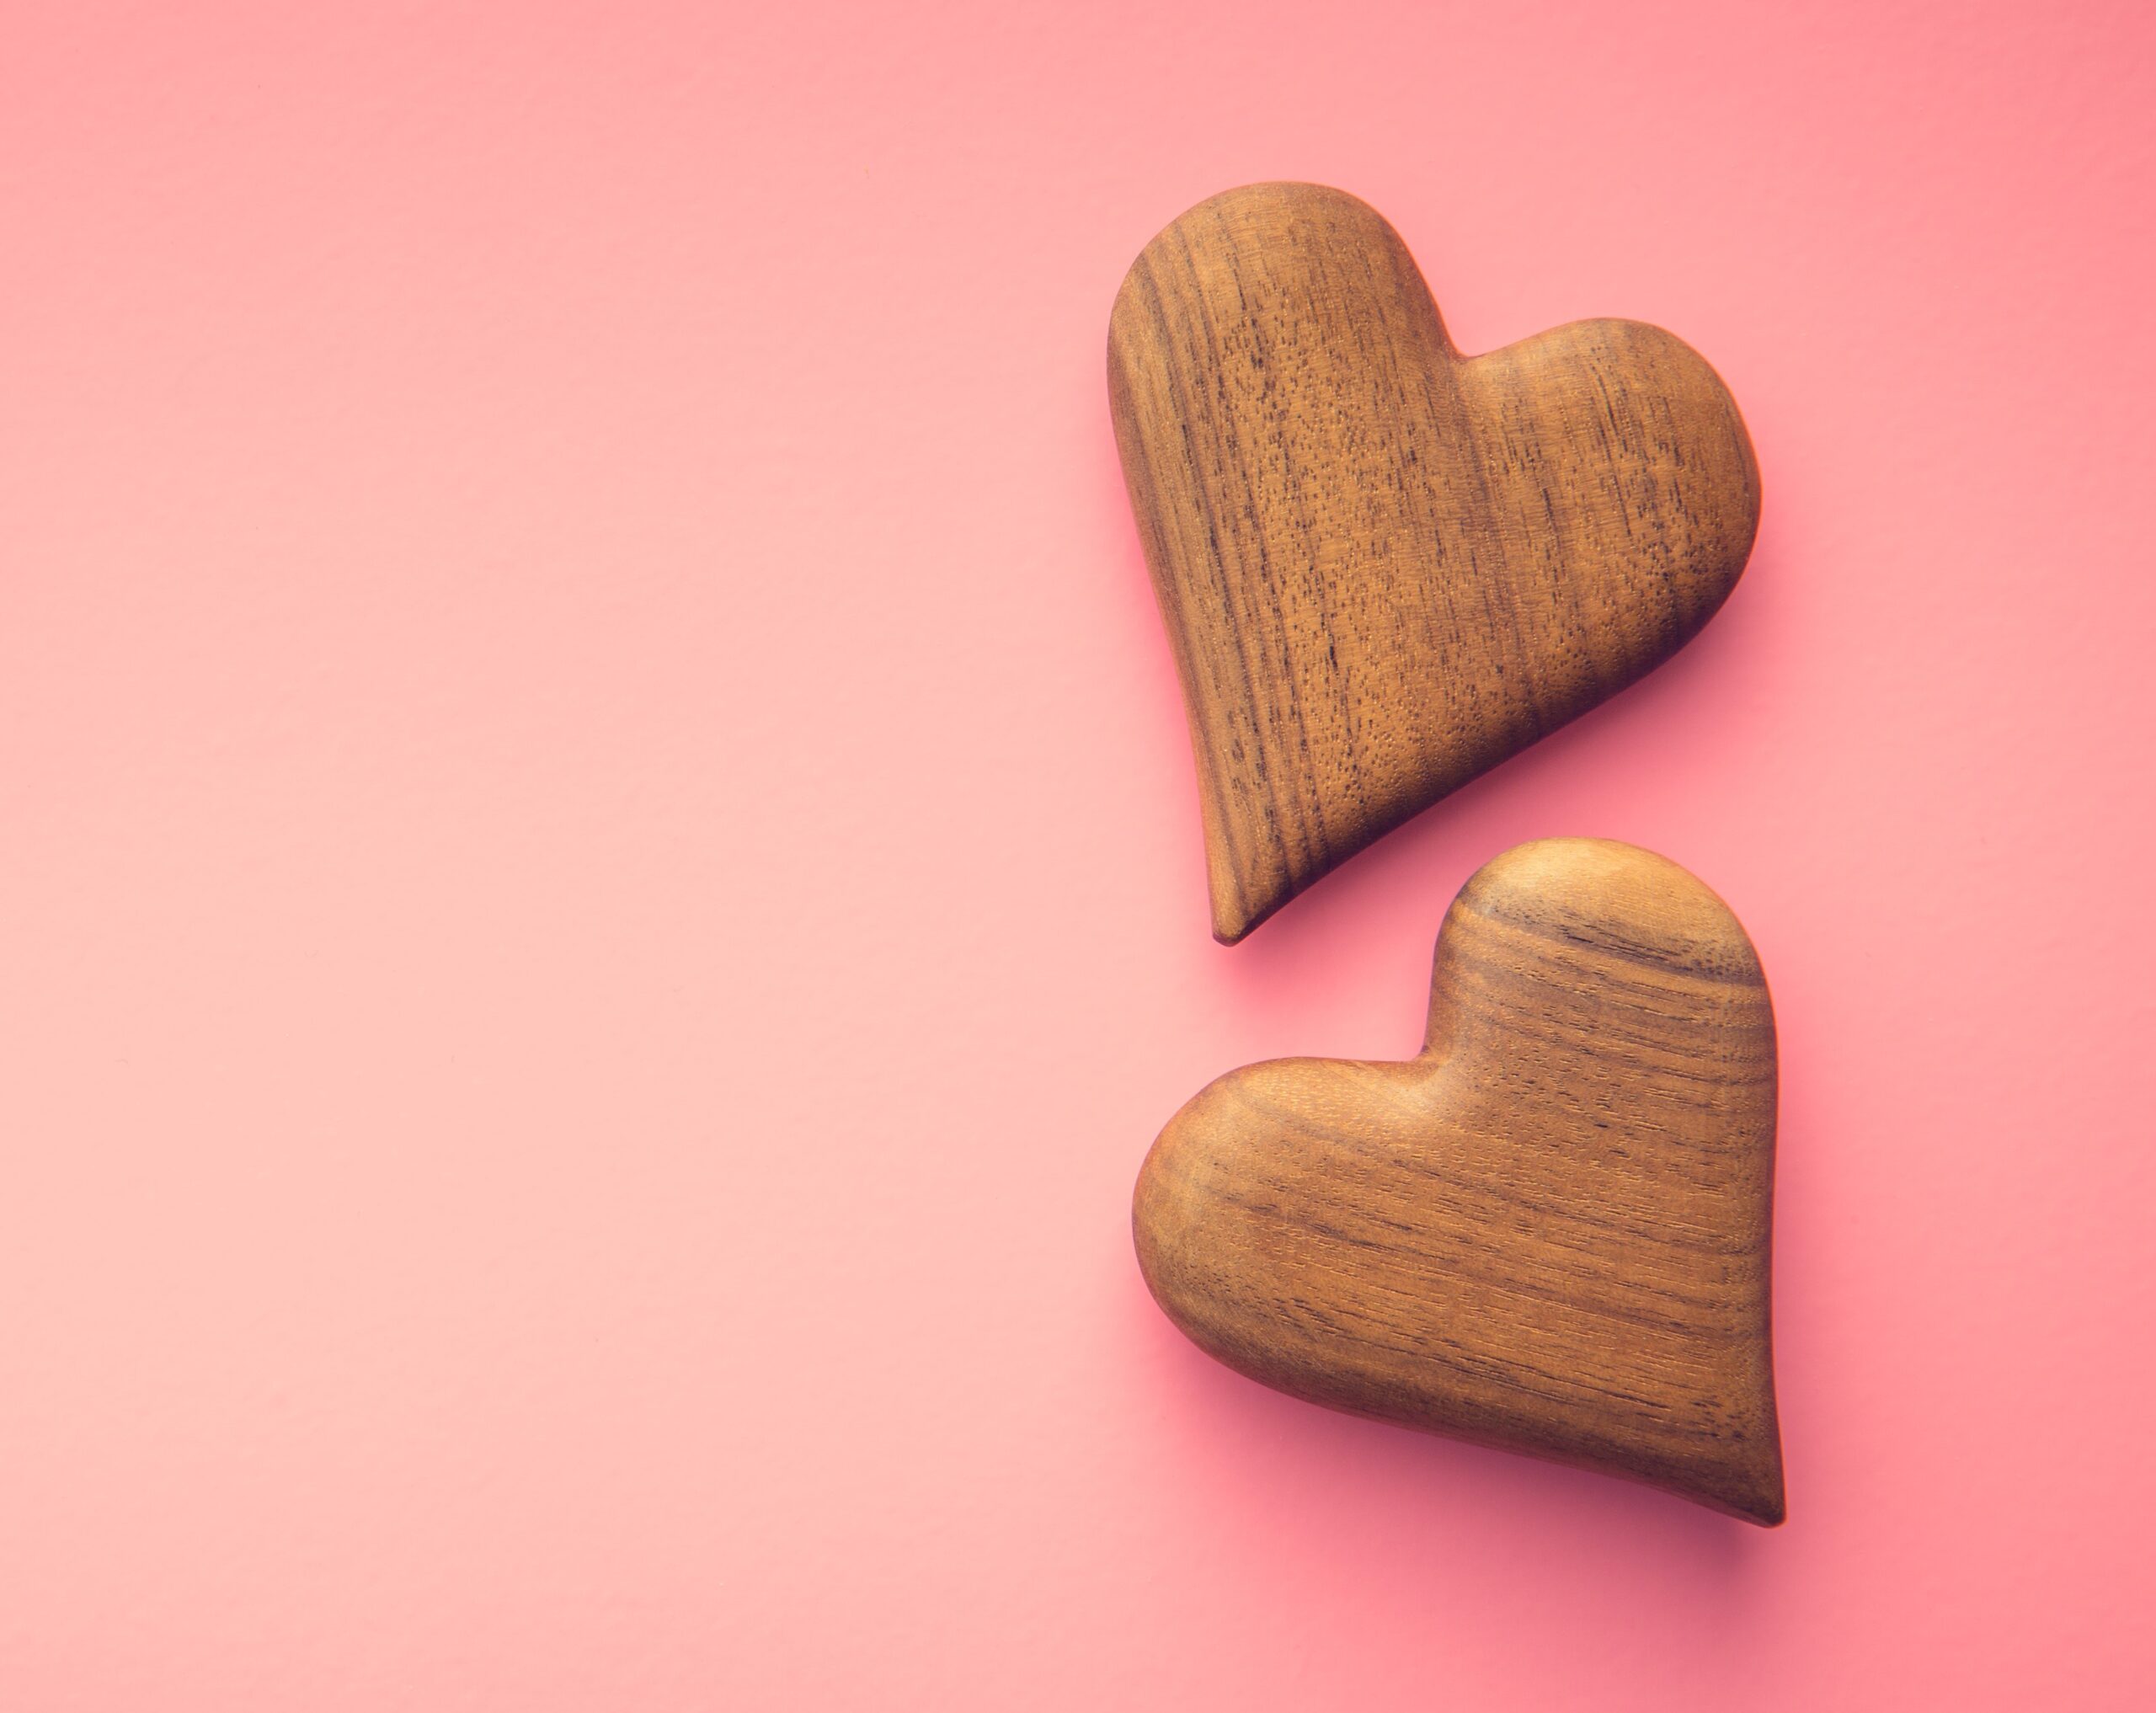 Two wooden hearts.